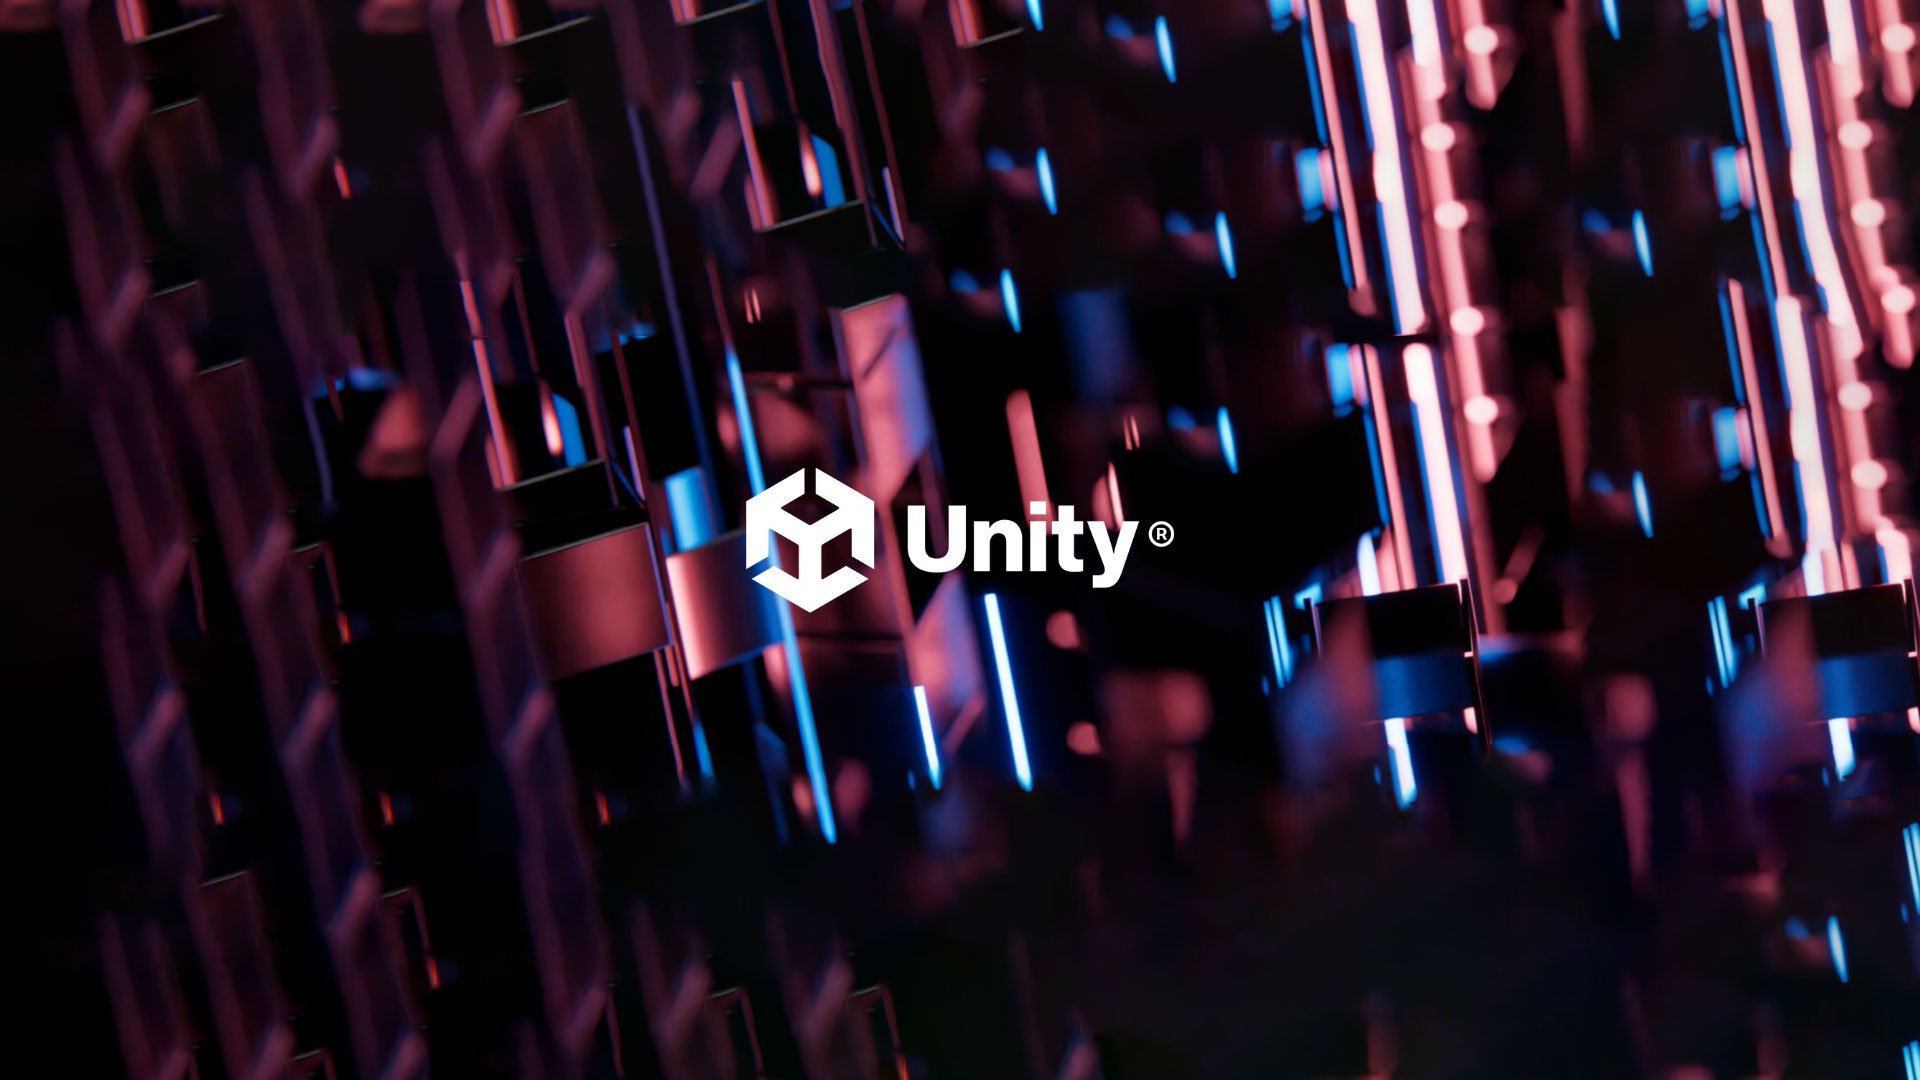 Unity has announced a new Runtime Fee that are leaving developers flabbergasted